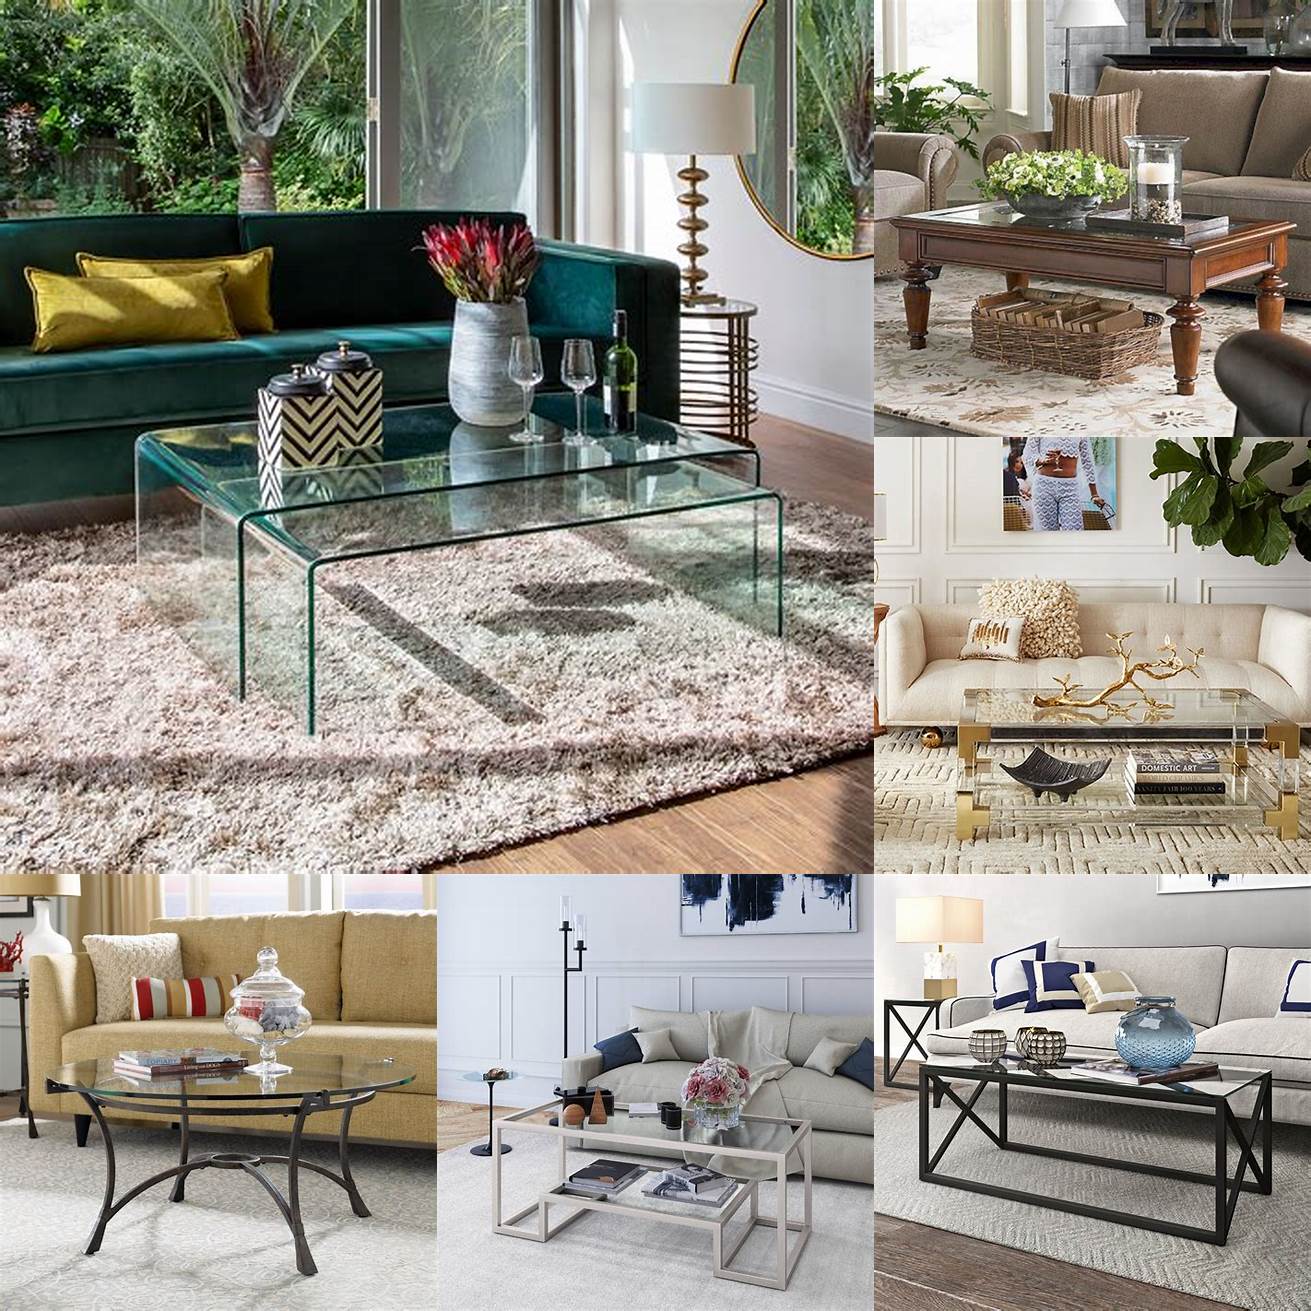 A glass coffee table adds a touch of elegance to your living room